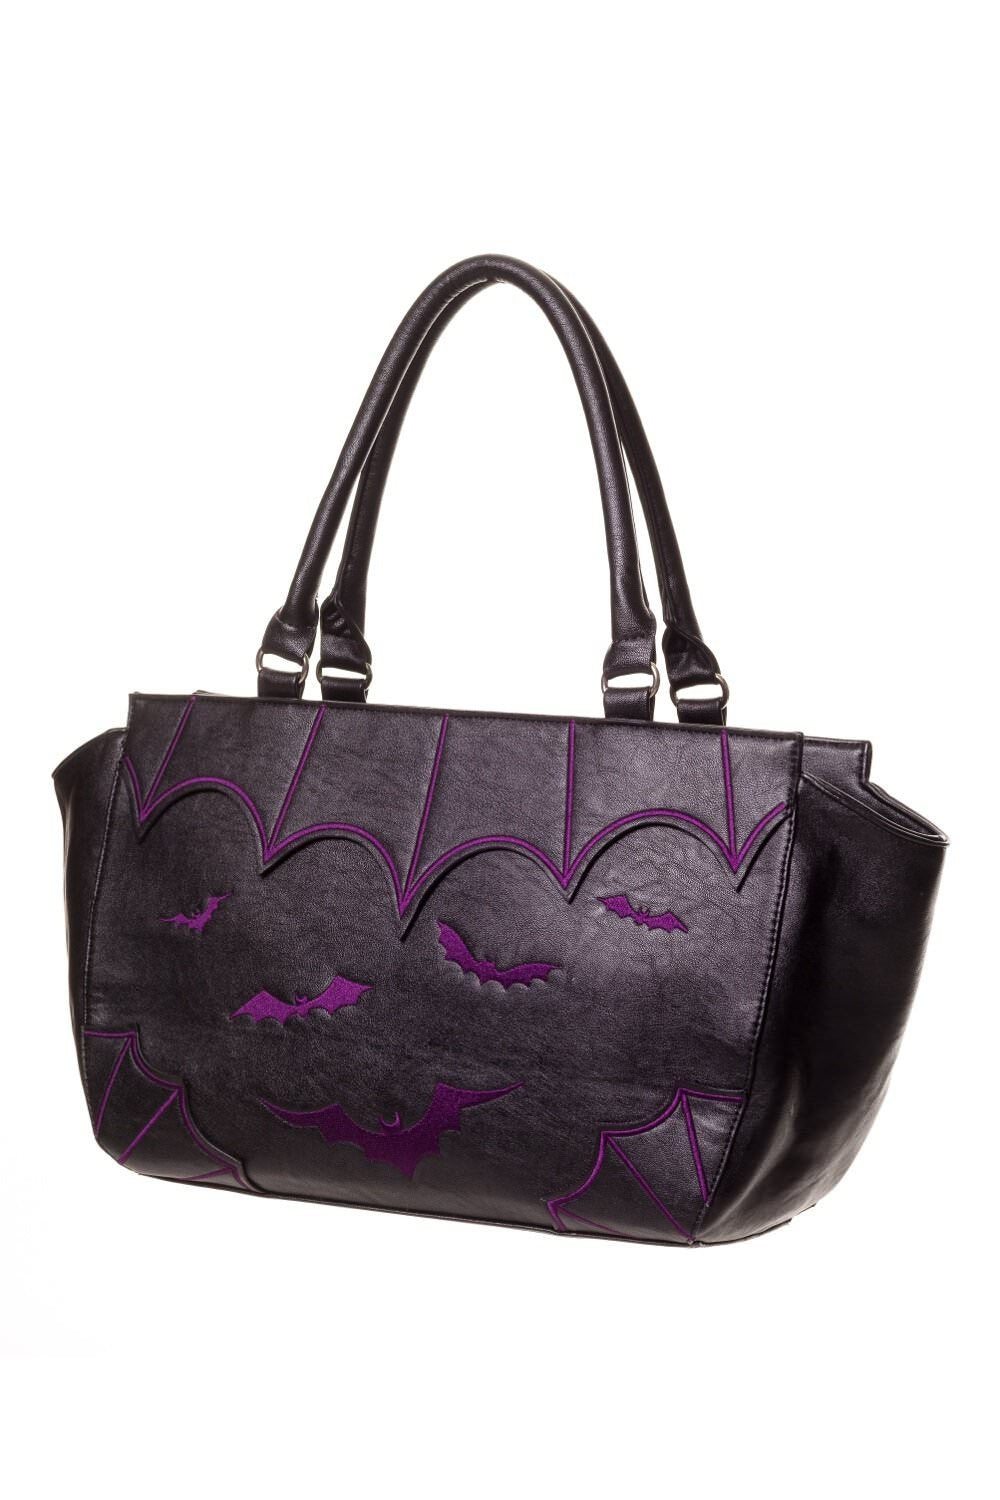 Large handbag with spider web and bat details in purple